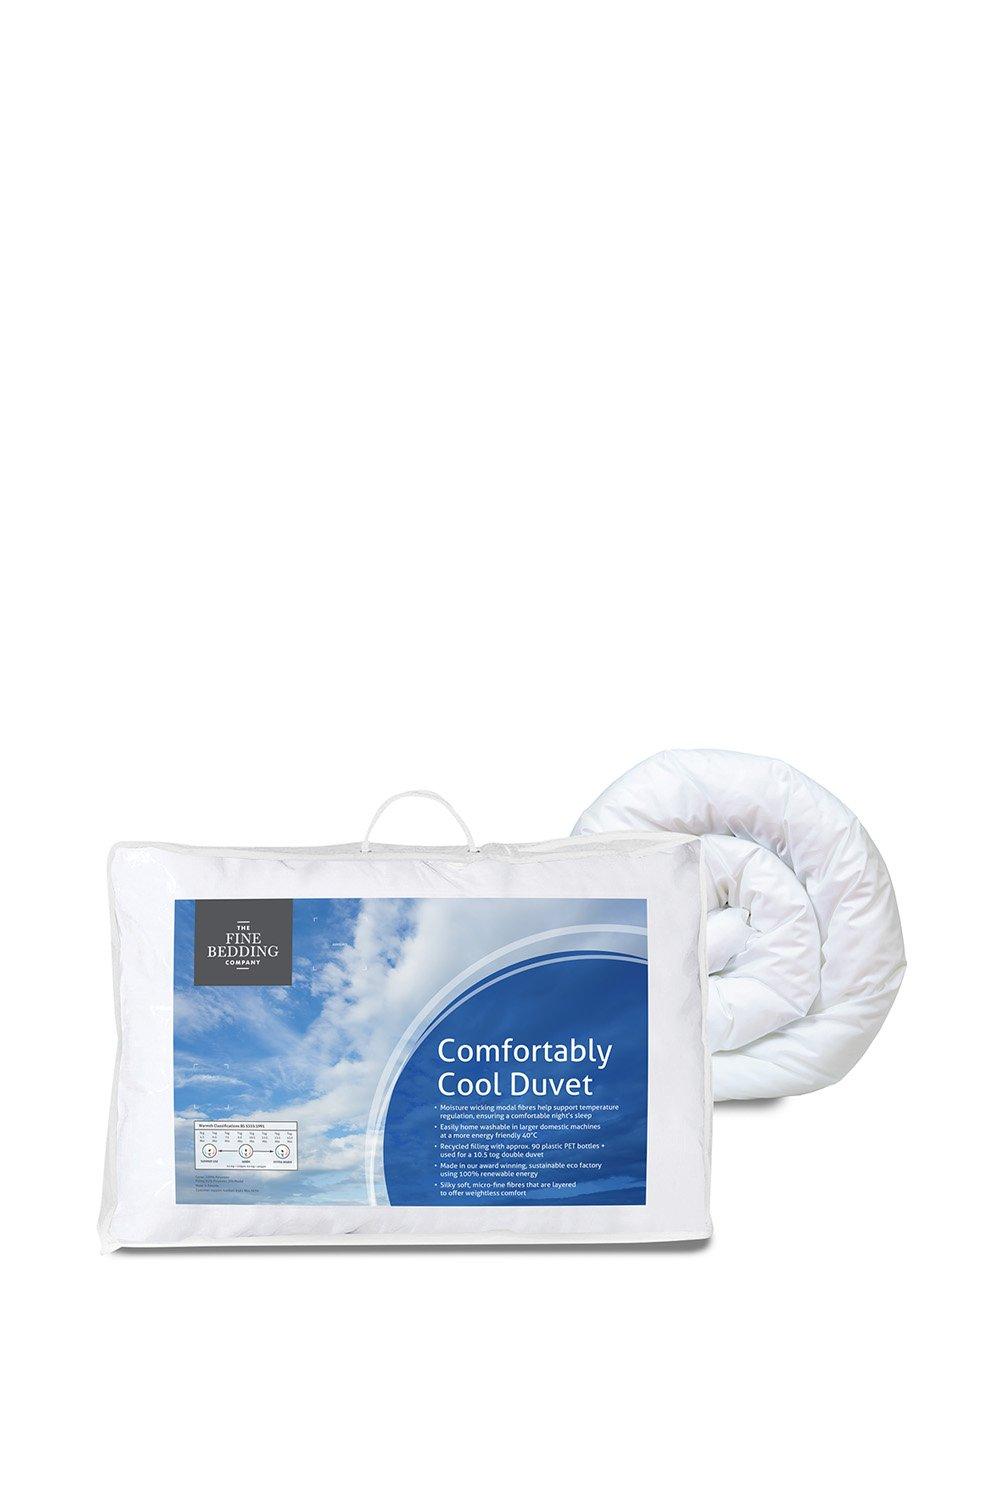 Picture of FBC Comfortably Cool Double Duvet 4.5 Tog